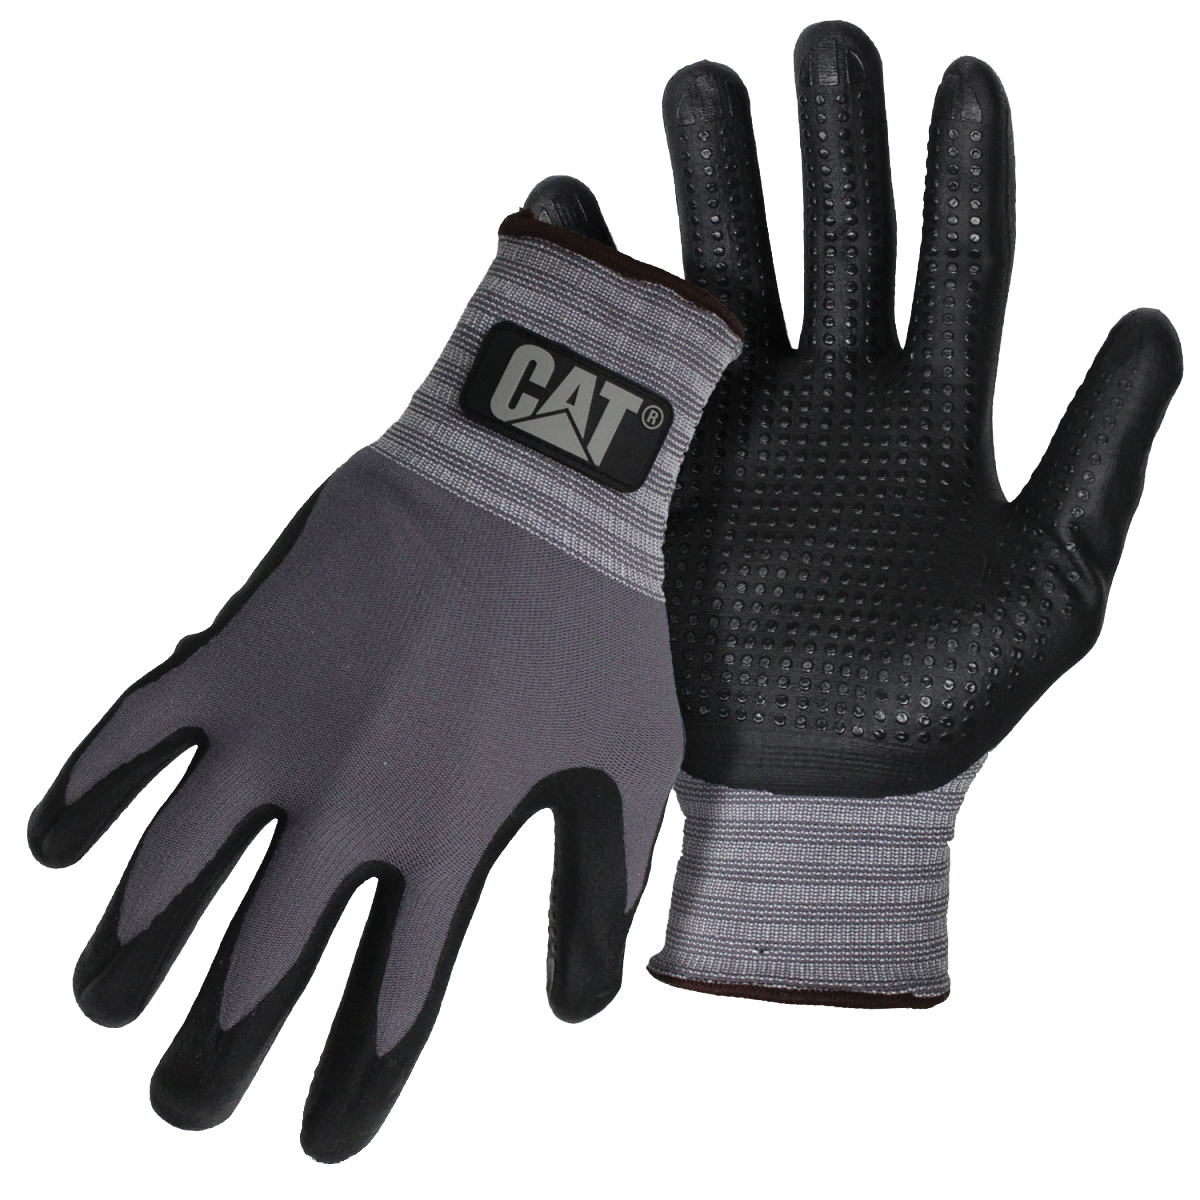 CAT017419M Work Gloves, M, Extended Knit Wrist Cuff, Nitrile/Nylon, Gray